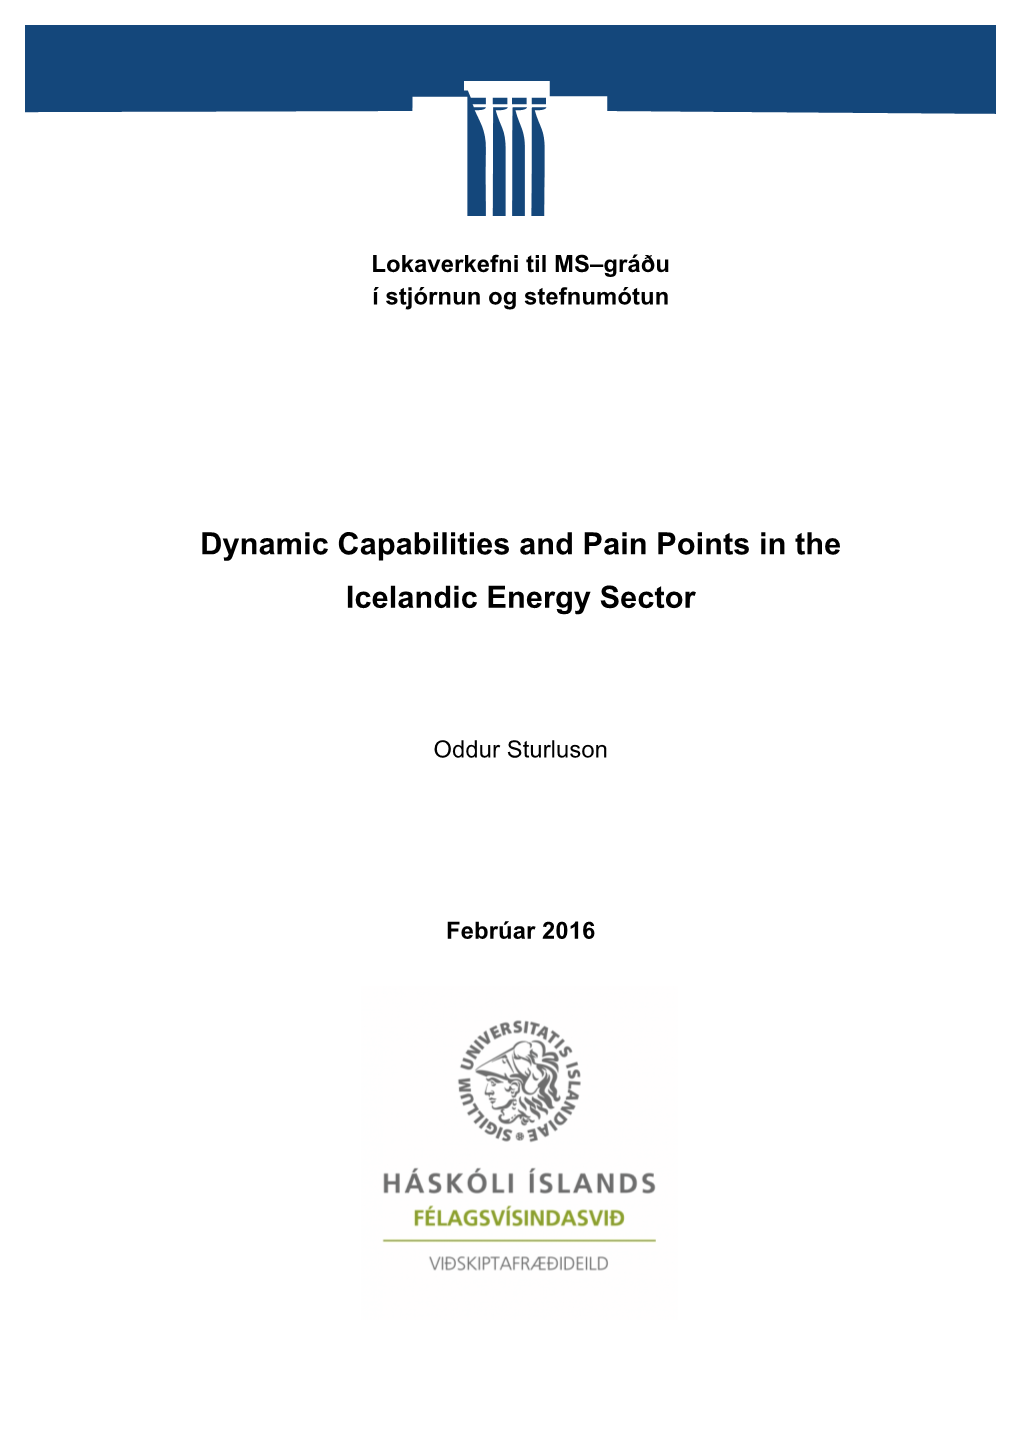 Dynamic Capabilities and Pain Points in the Icelandic Energy Sector